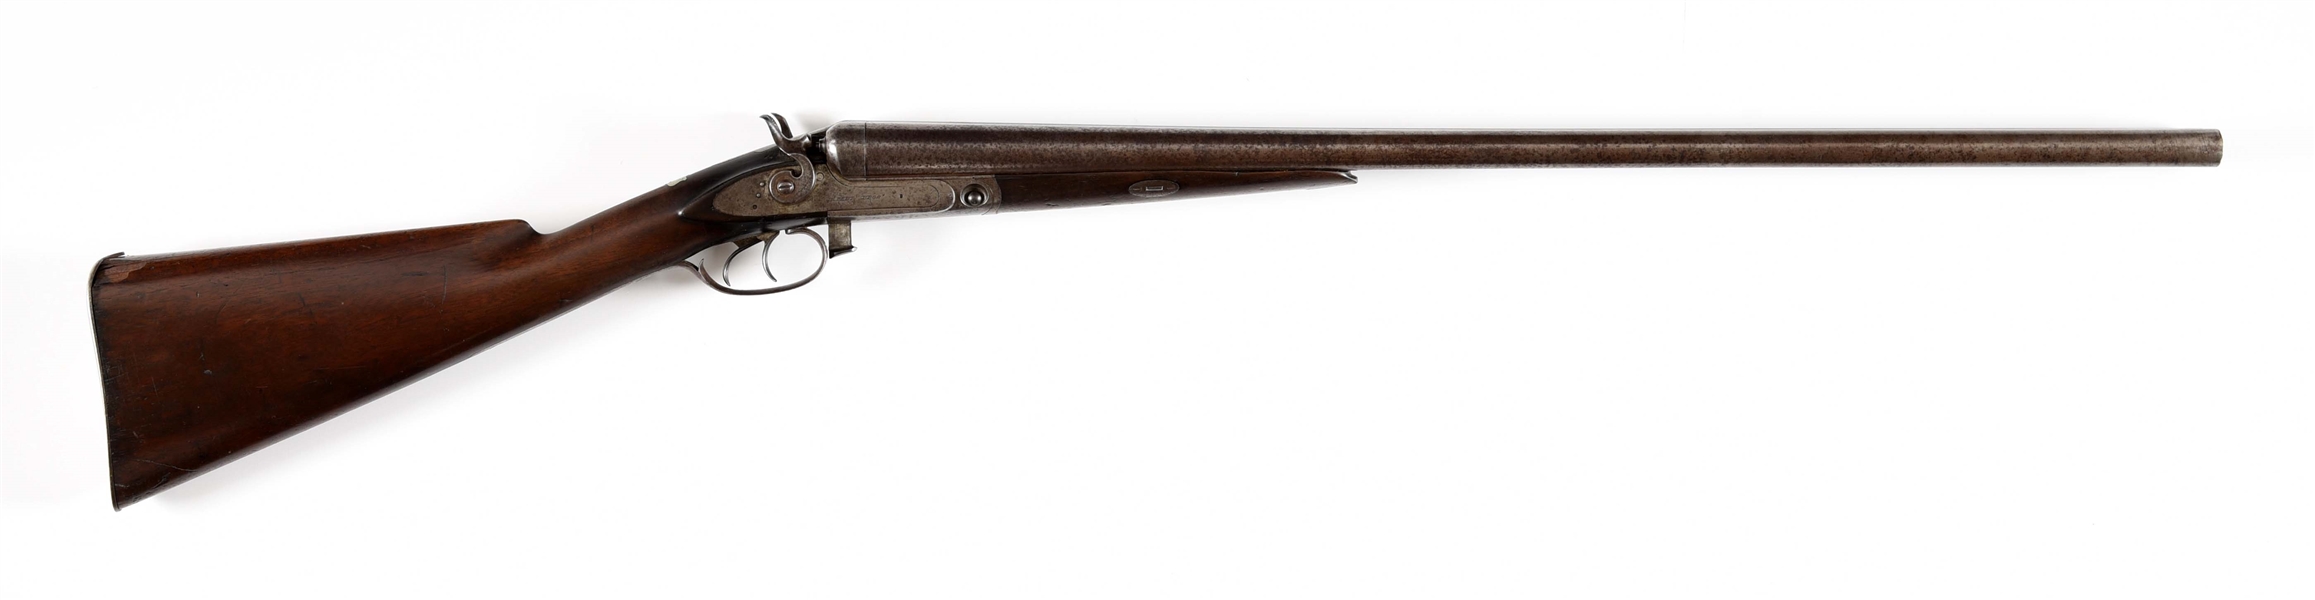 (A) PARKER BROS LIFTER ACTION SIDE BY SIDE SHOTGUN 12 BORE.